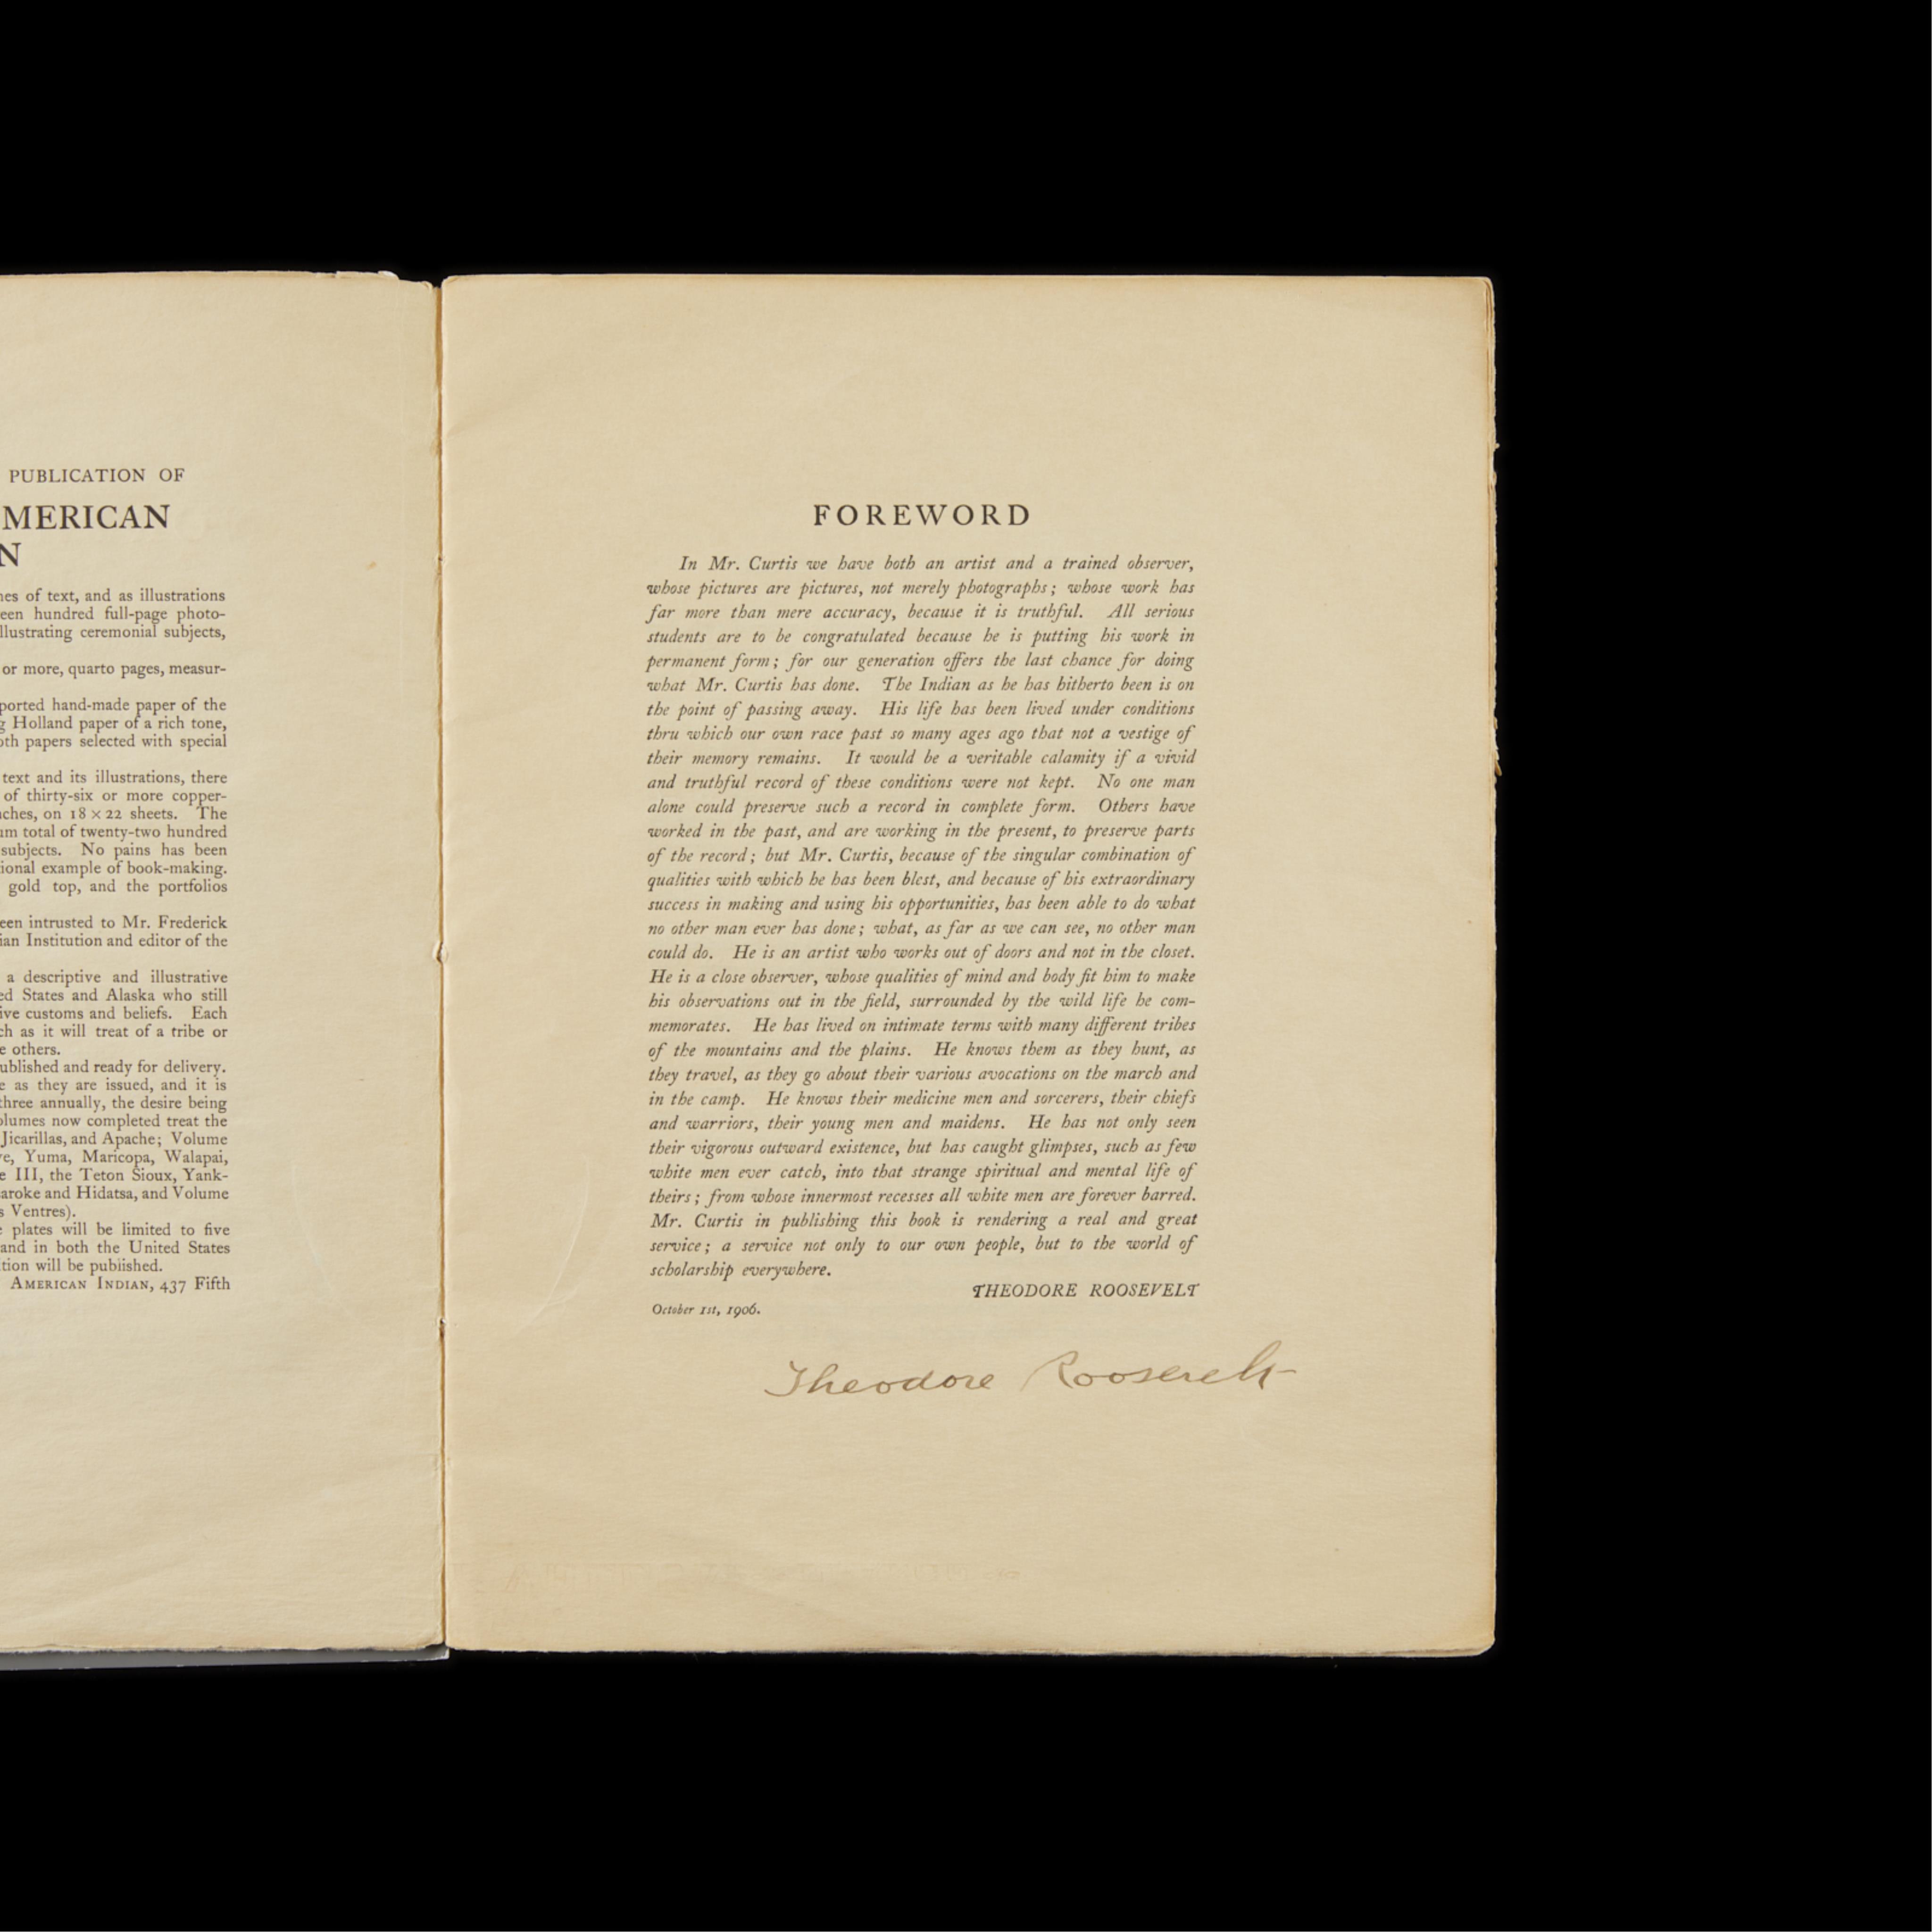 "The N. American Indian" Sample Signed Roosevelt - Image 7 of 11